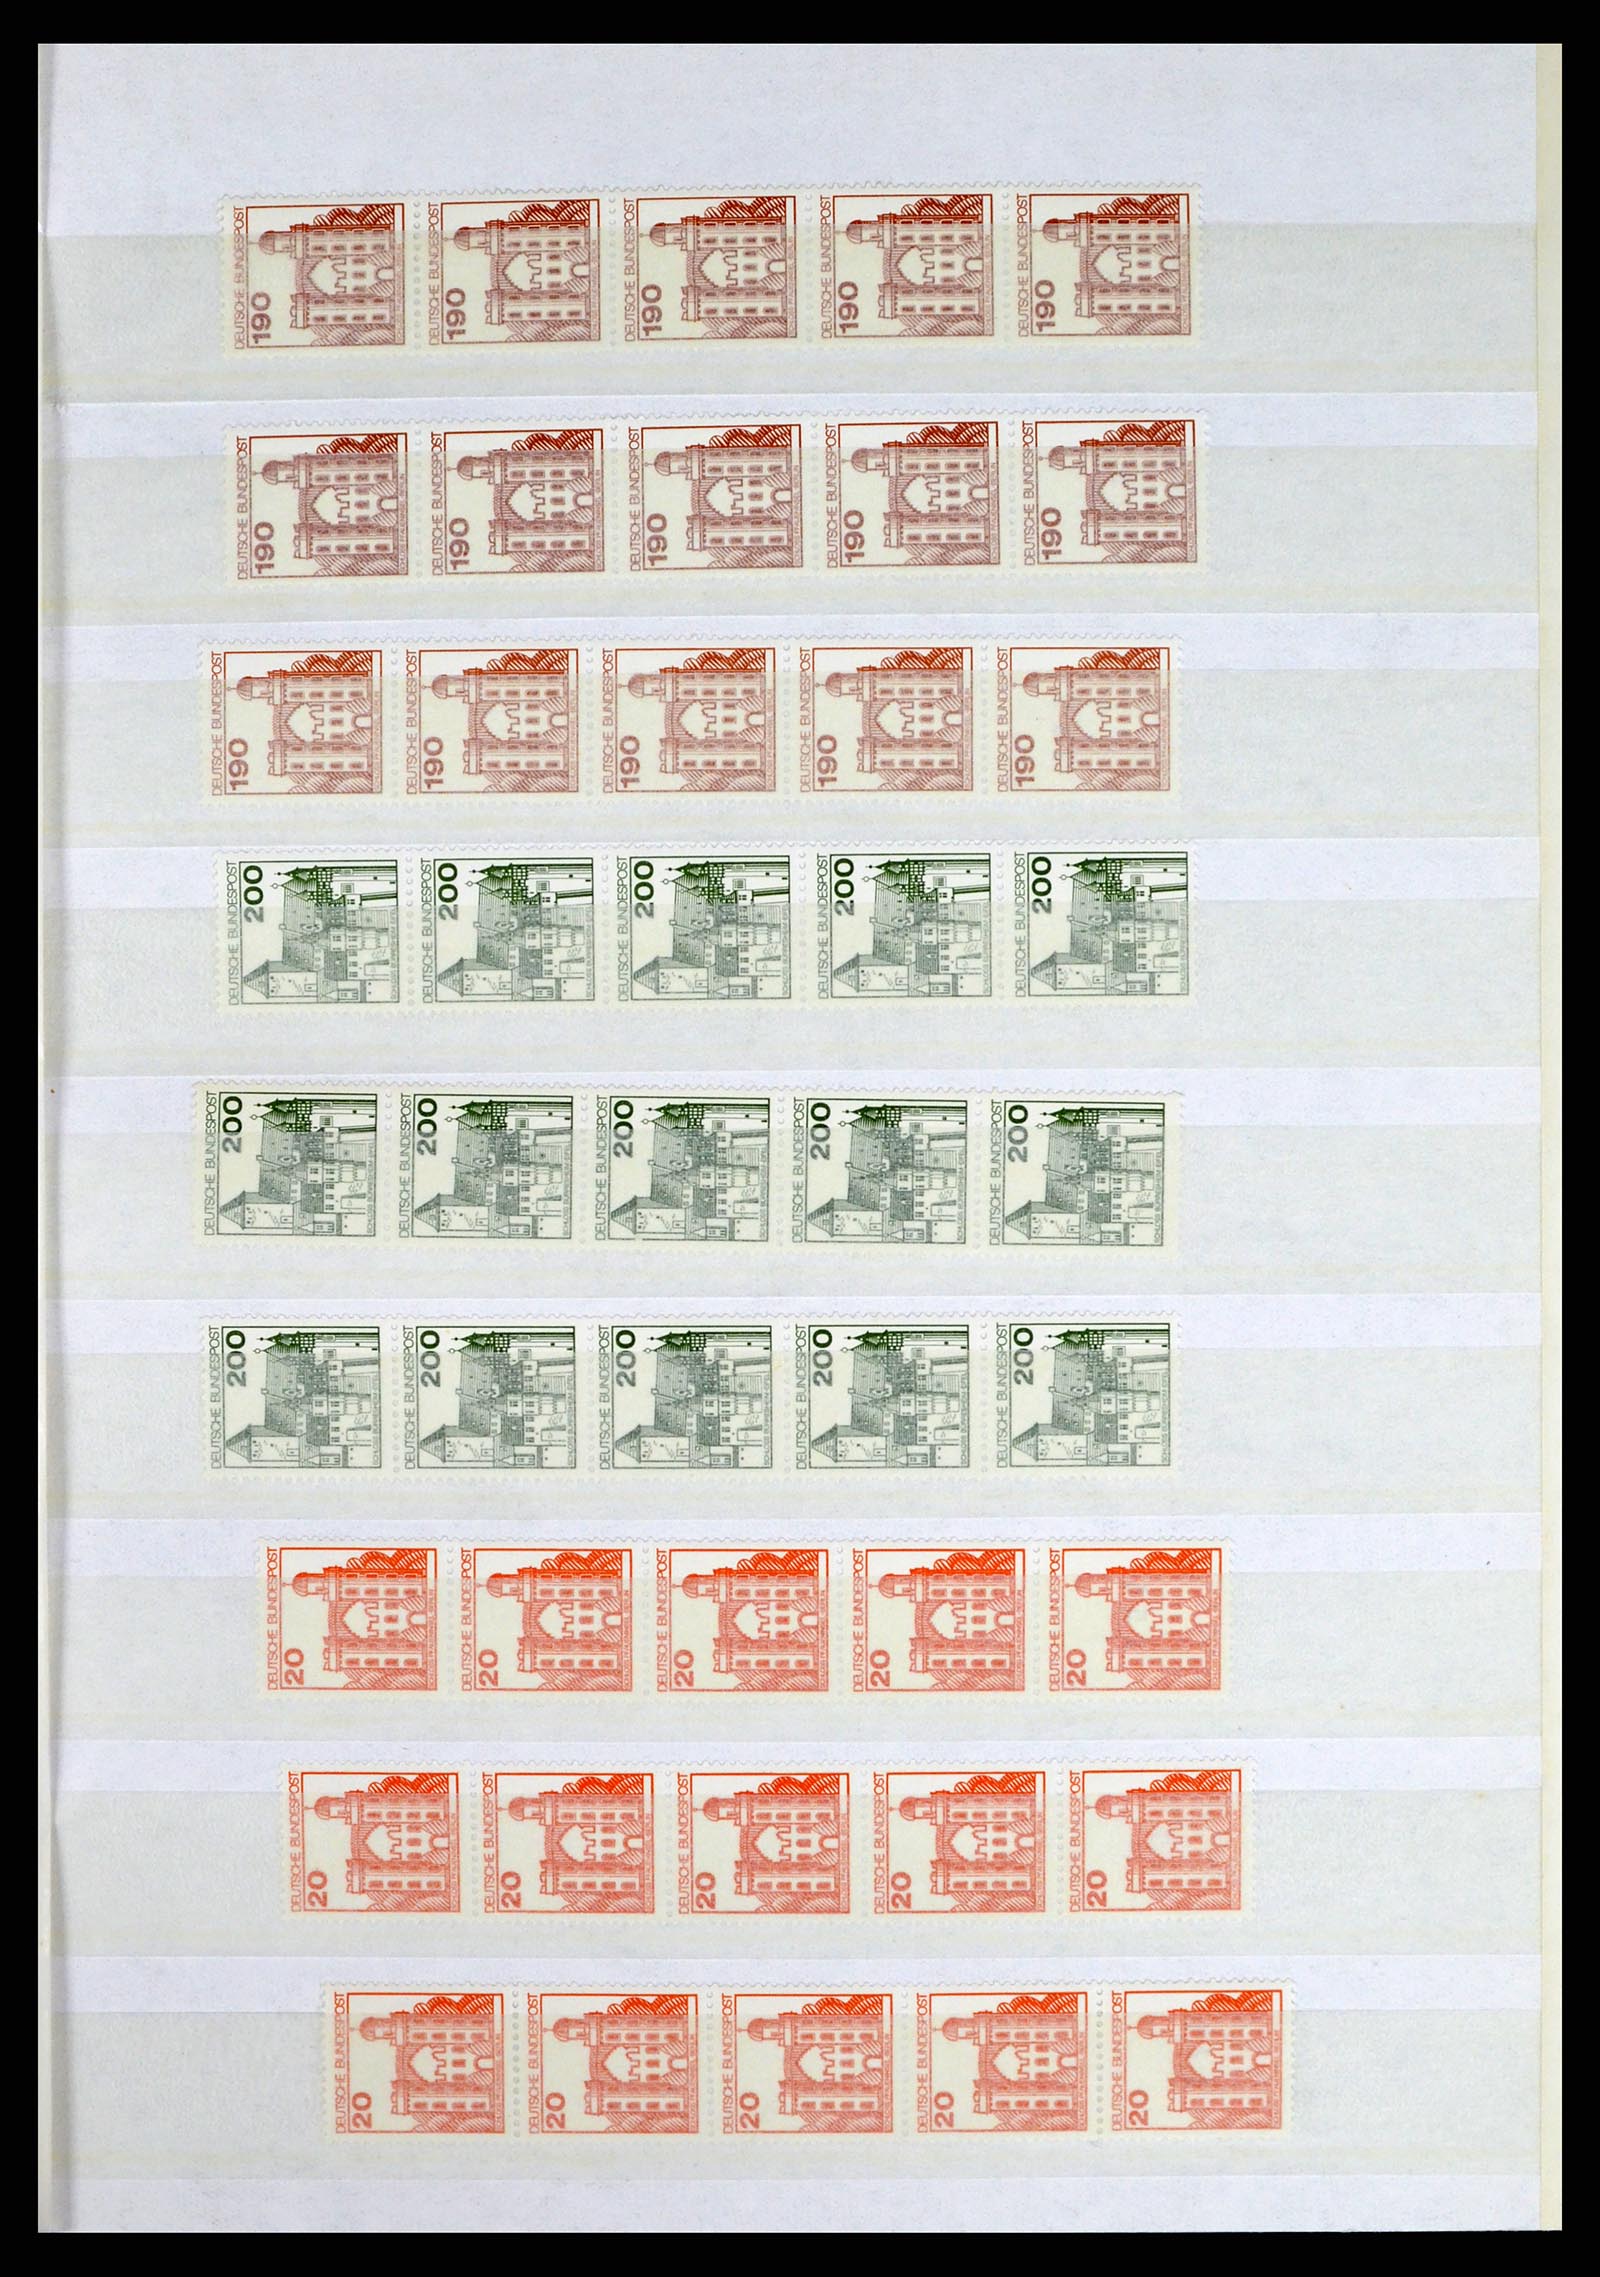 37354 065 - Stamp collection 37354 Bundespost and Berlin 1955-2000.